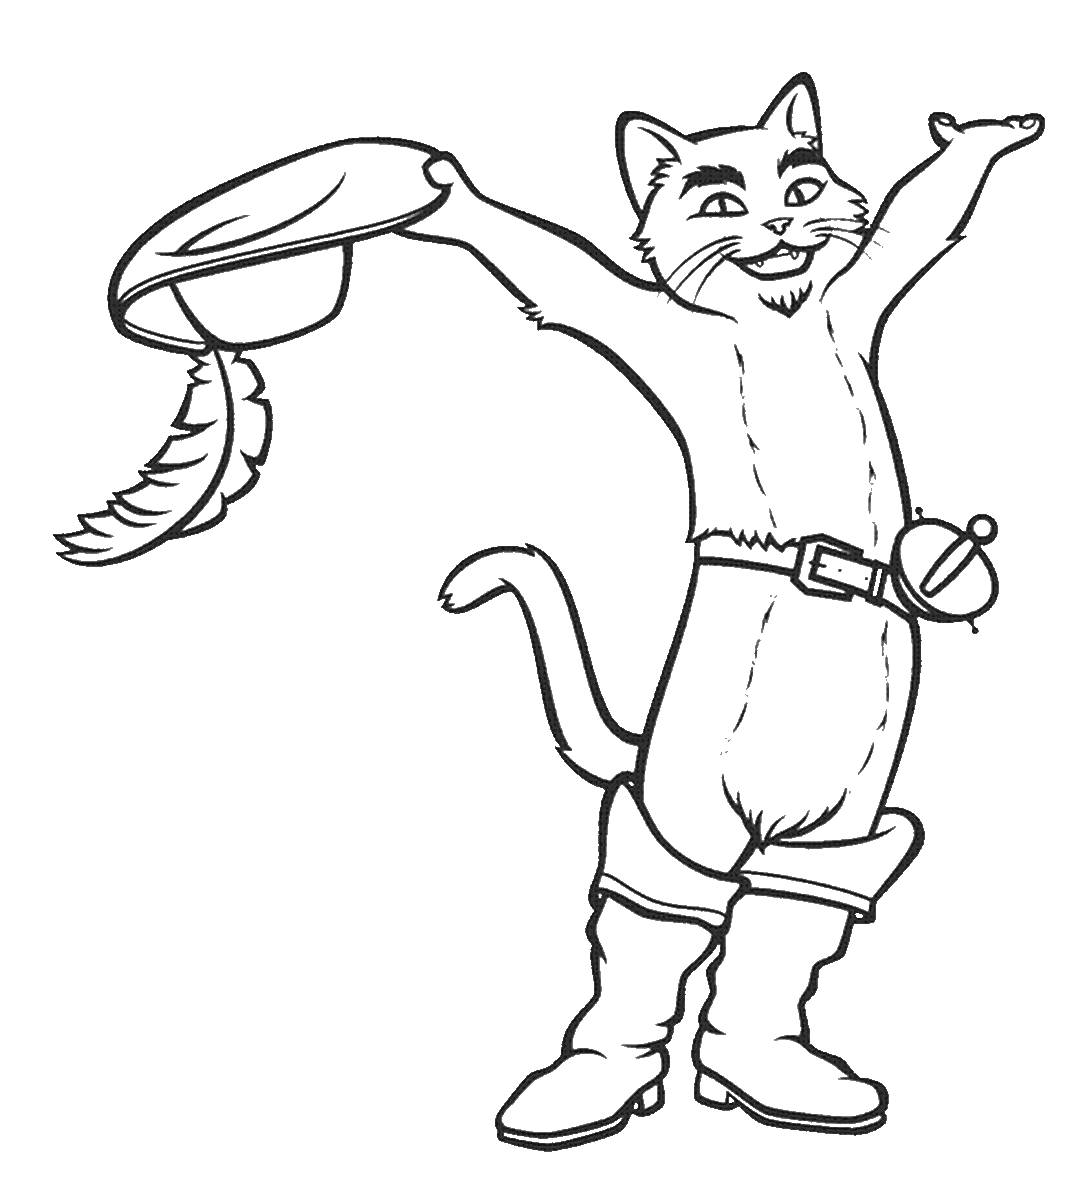 Puss in Boots Free Coloring Page